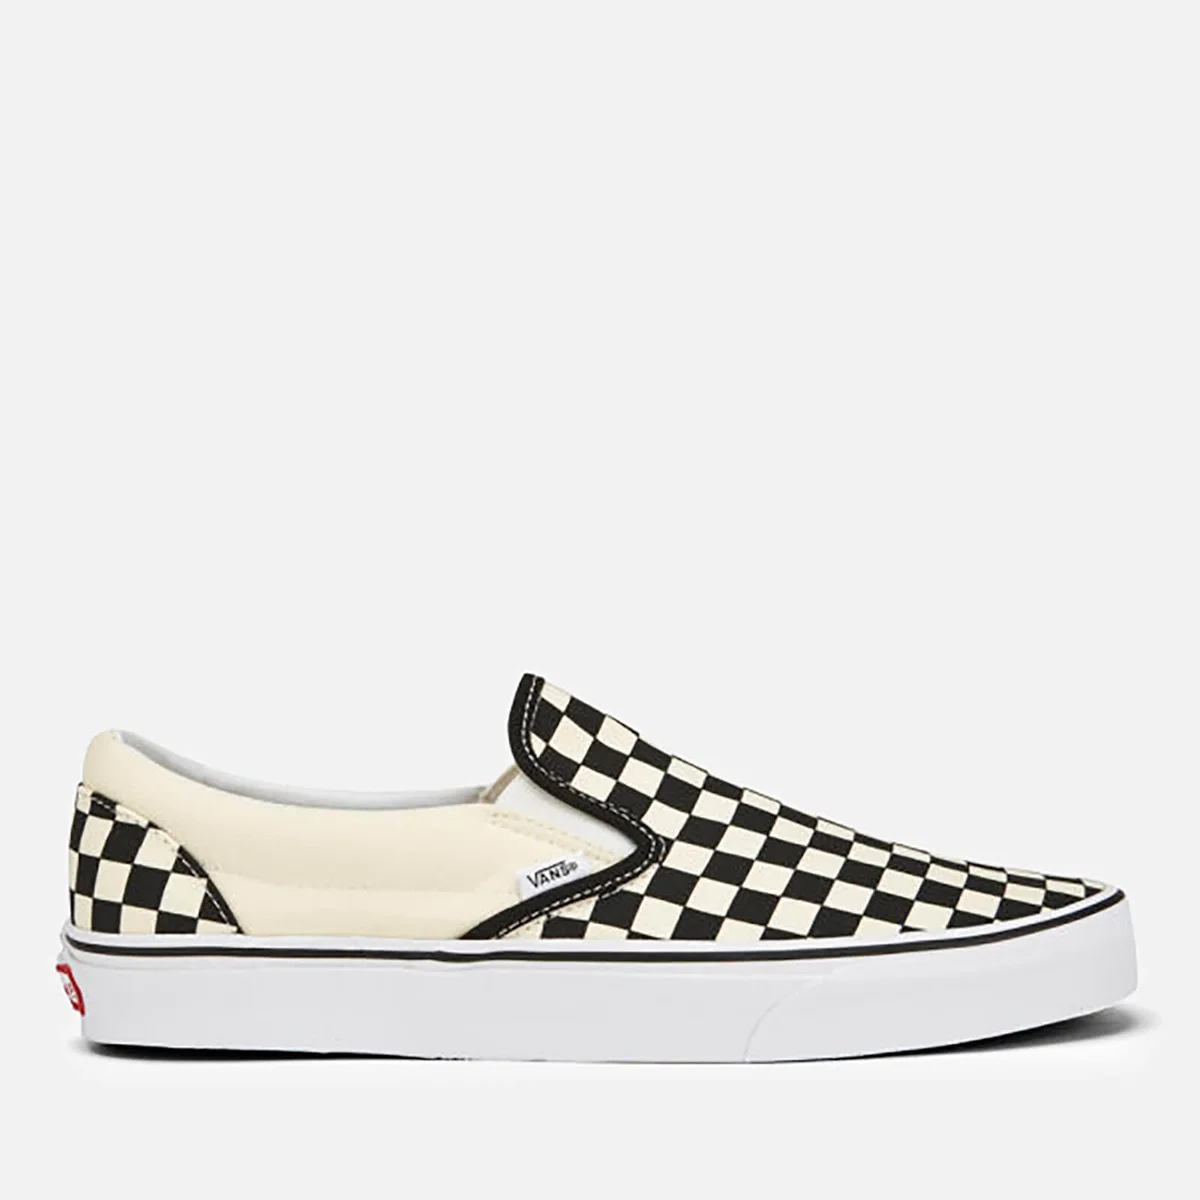 Vans Classic Slip-On Trainers - Black/White Checkerboard Image 1